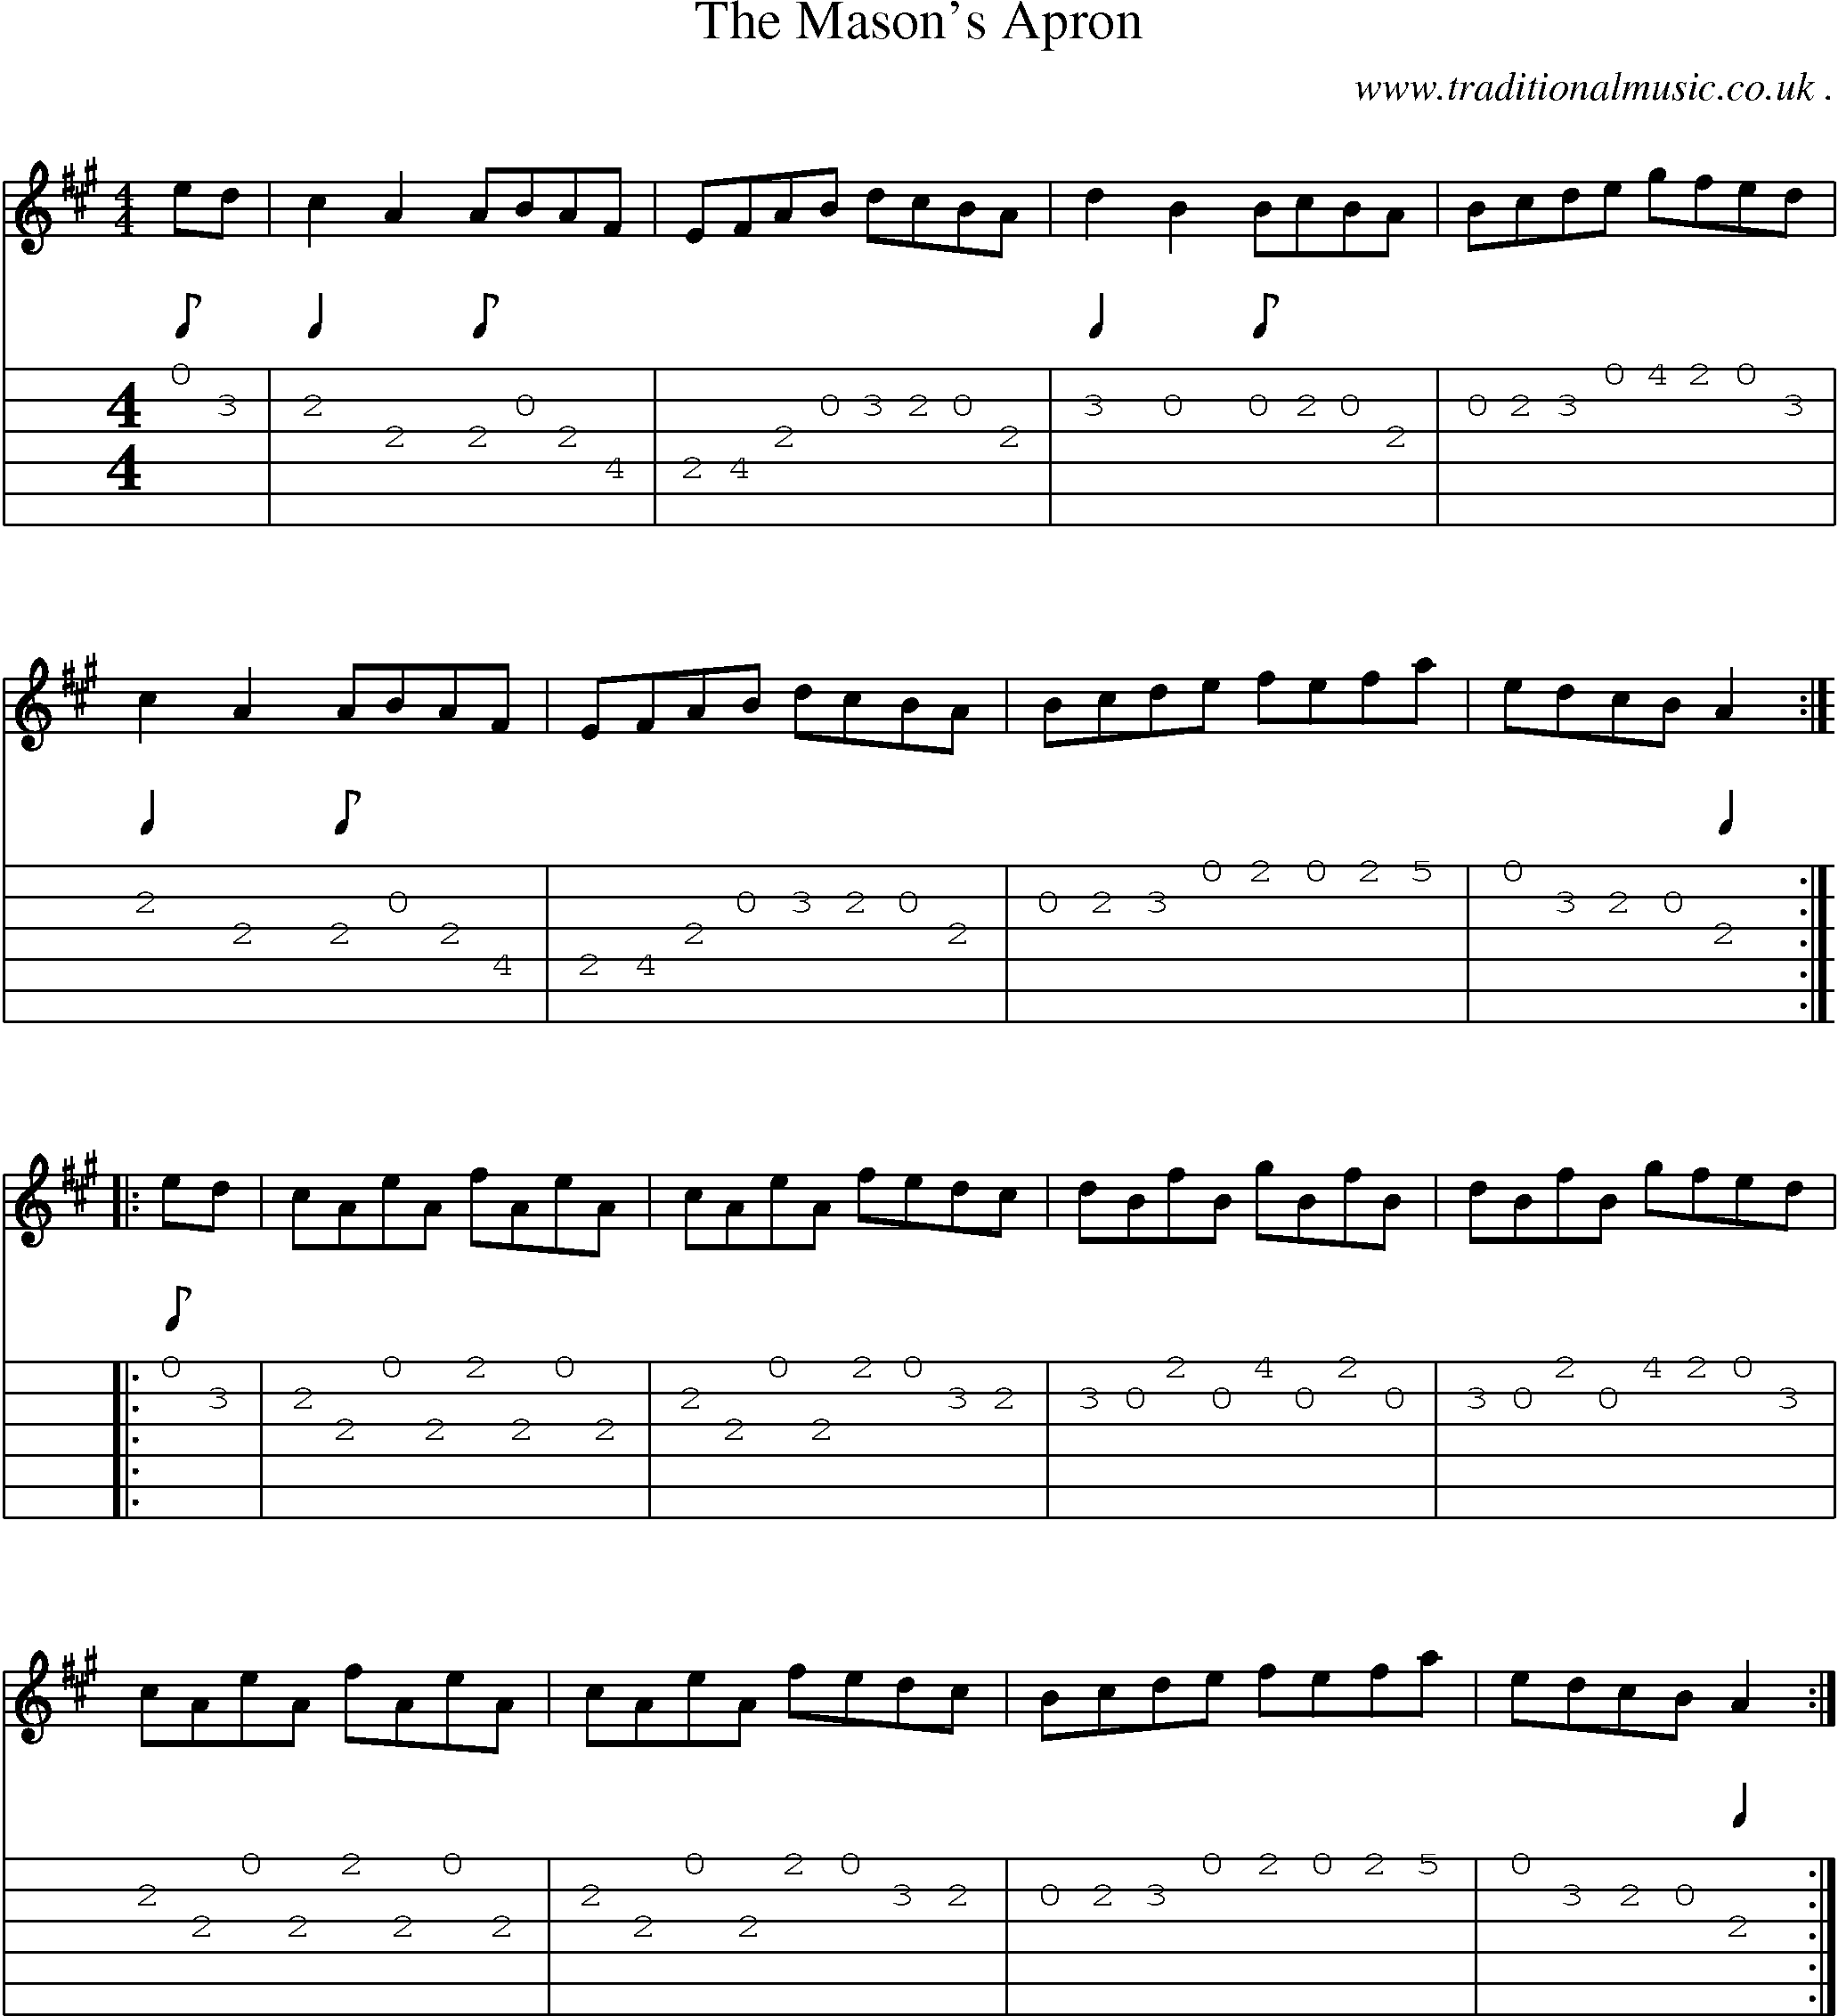 Sheet-Music and Guitar Tabs for The Masons Apron